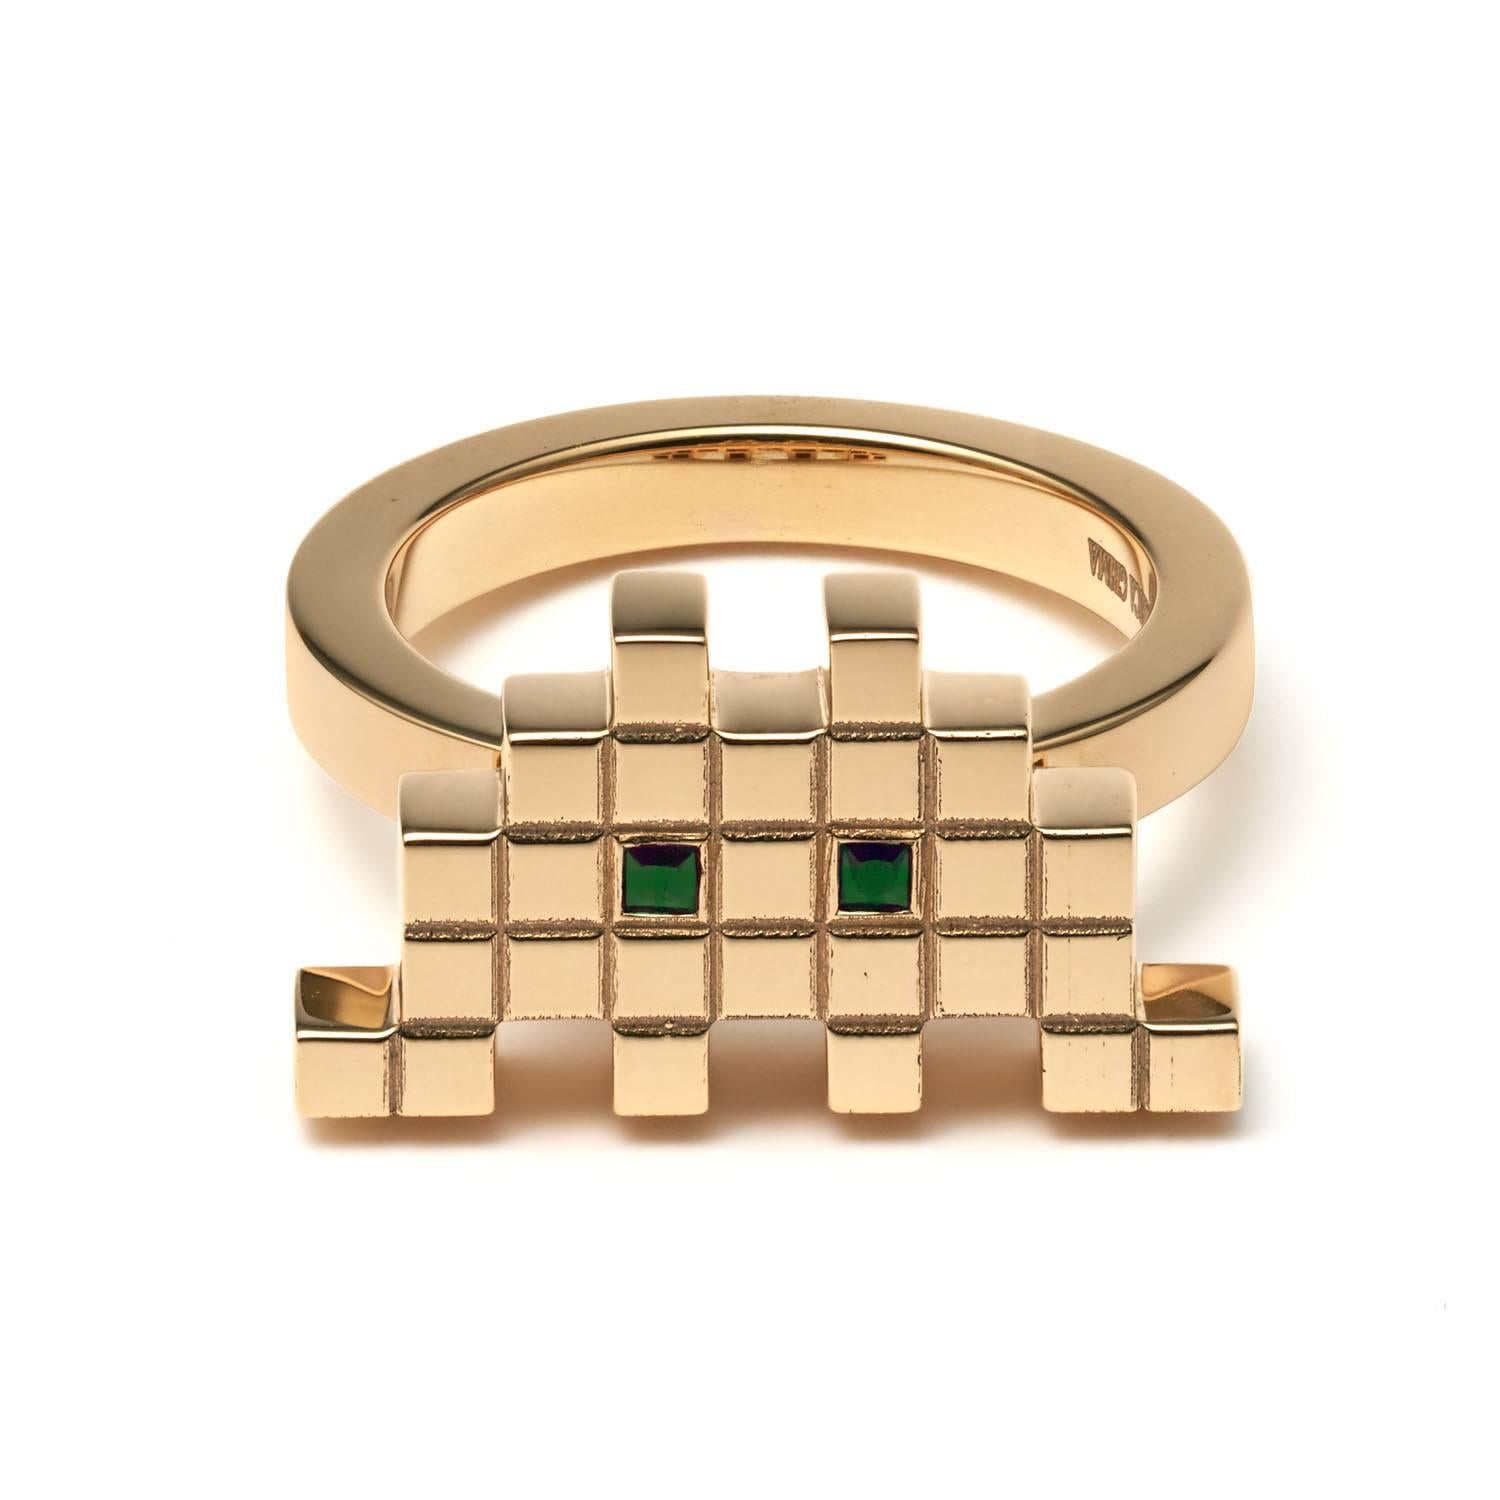 "Invader I" ring in yellow gold and emeralds by Francesca Grima 

・Polished 18ct. Yellow Gold
・Motif length 2cm
・Motif width 1cm
・2 Princess-cut Emeralds (0.04cts)

French Size 53  US Size 6 1/4  UK Size M

Signed Francesca Grima,